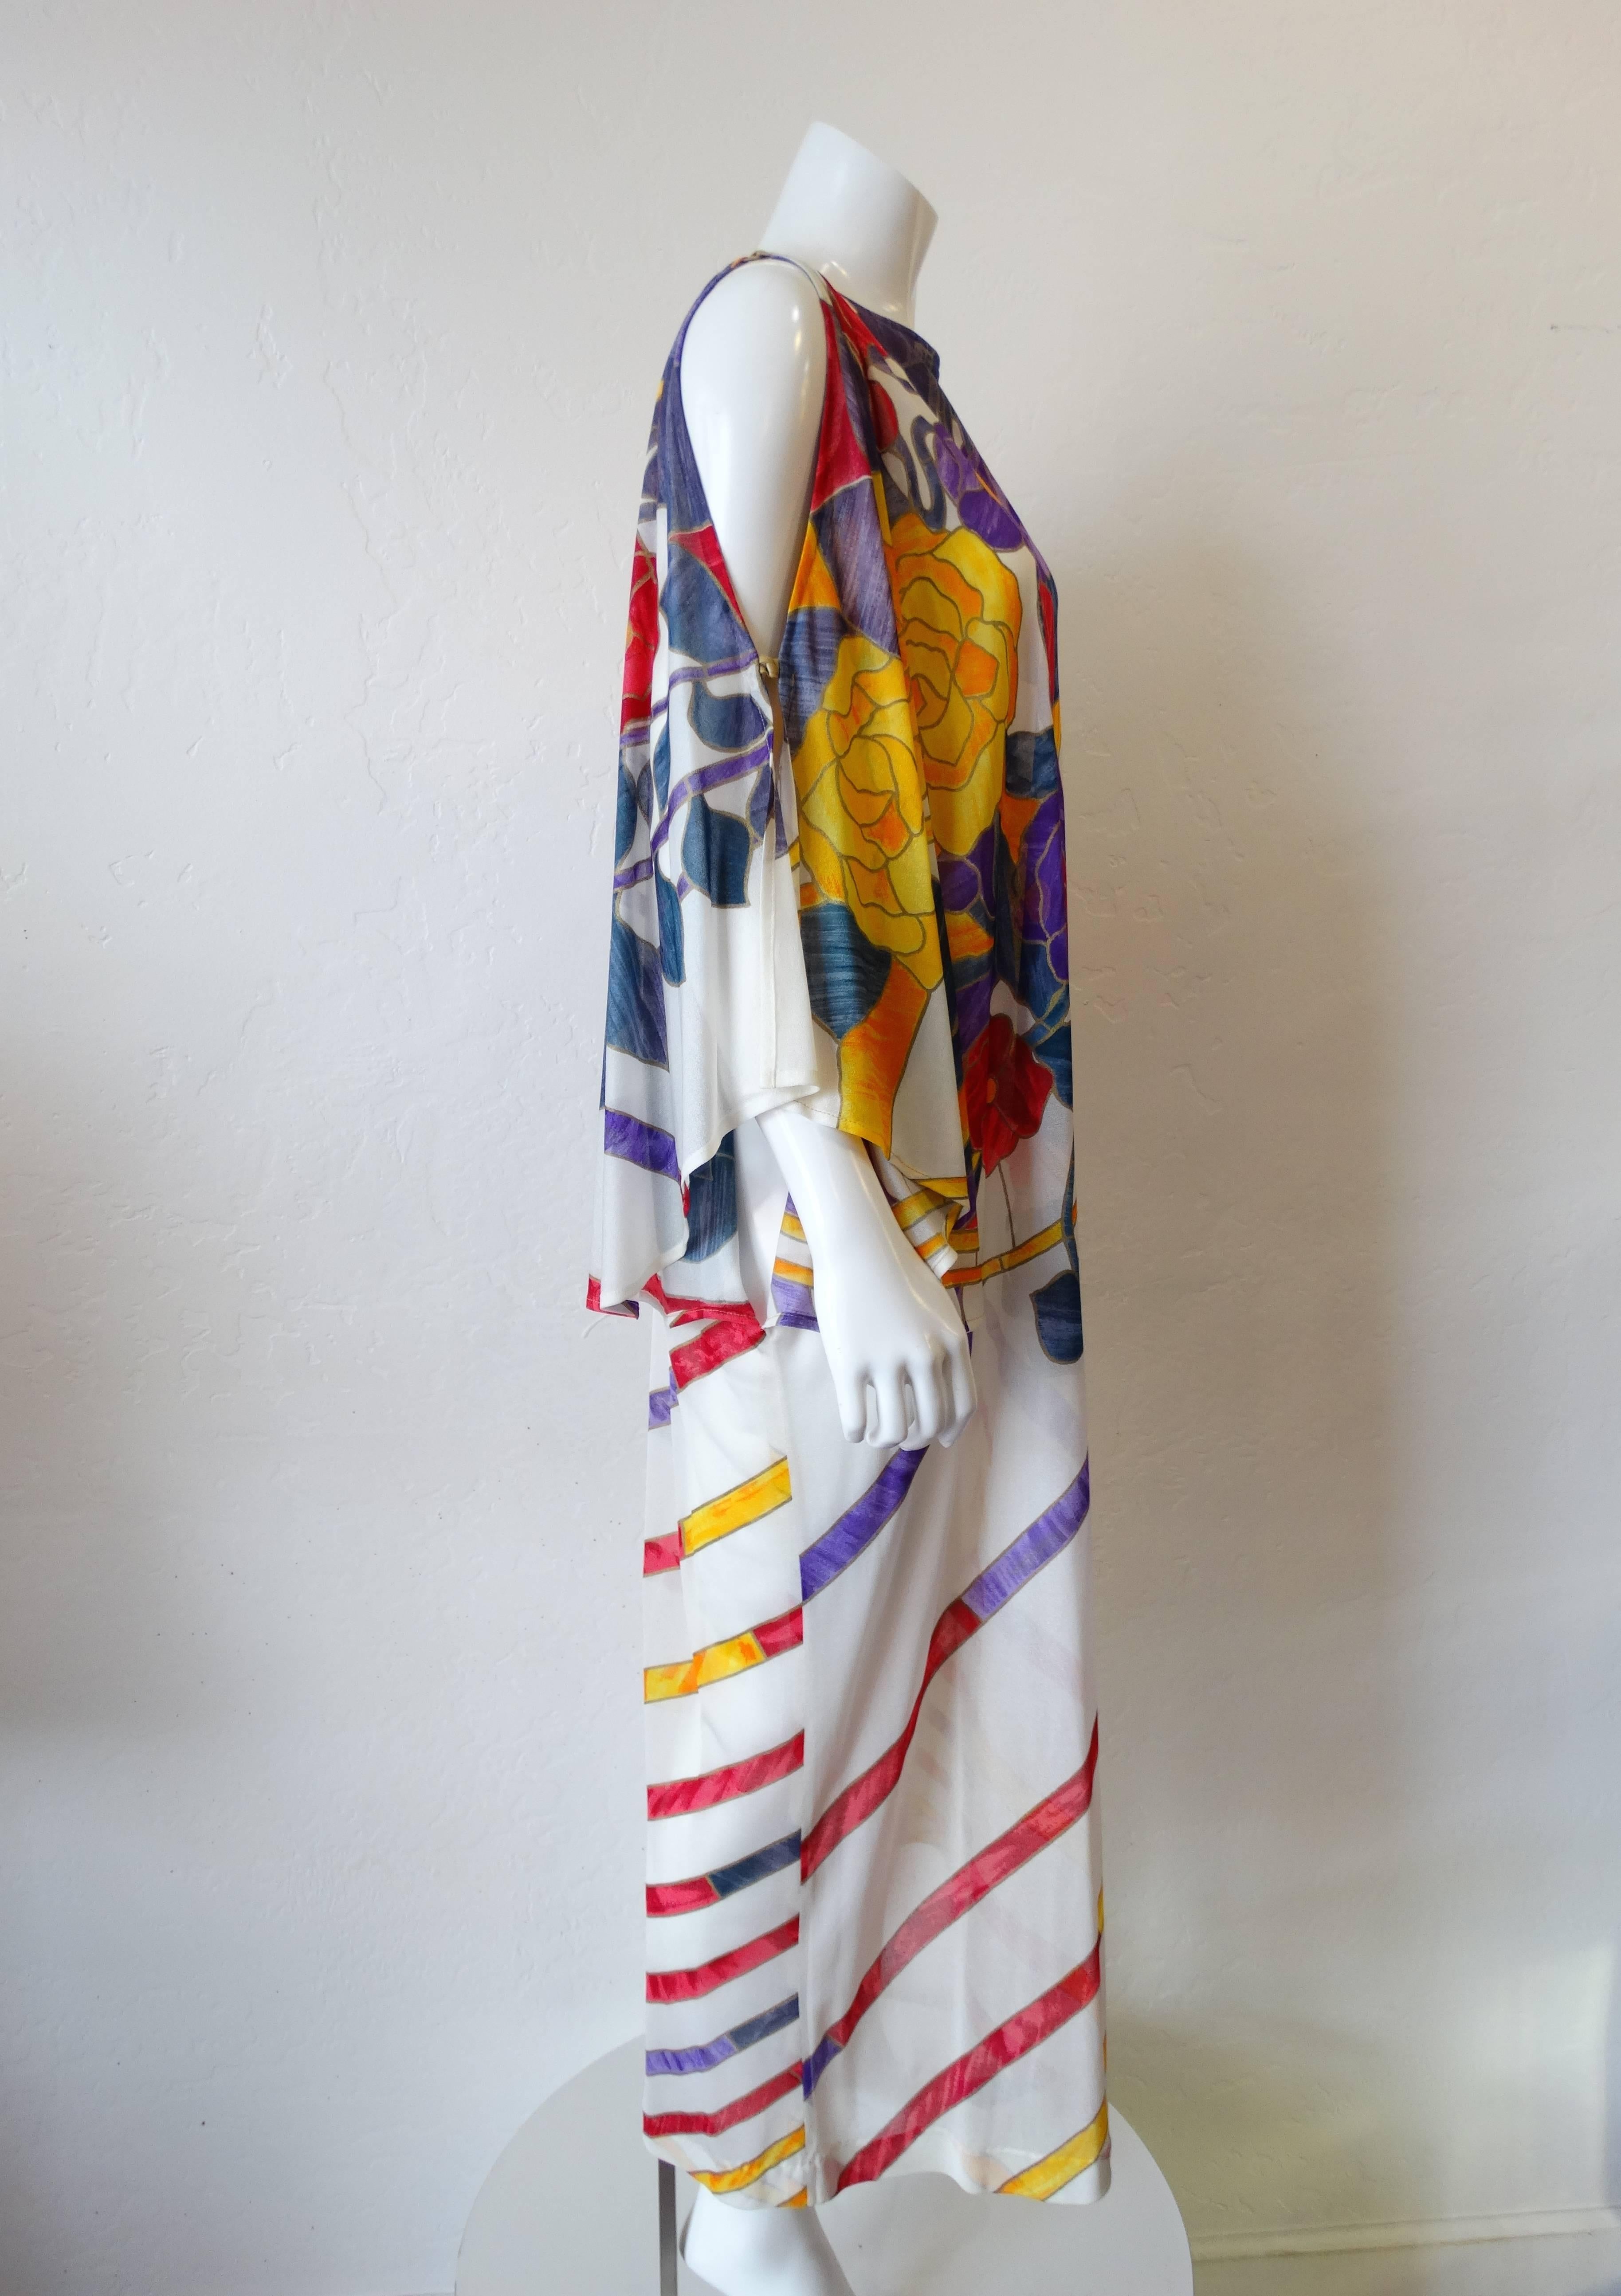 Look like a Goddess in this rare piece from coveted 1970s designer Gottex. Dreamy maxi fit with sexy slits on the fluttery sleeves. Bold stained glass inspired floral print with stripes down the skirt on semi sheer fabric. Marked a size Medium- can